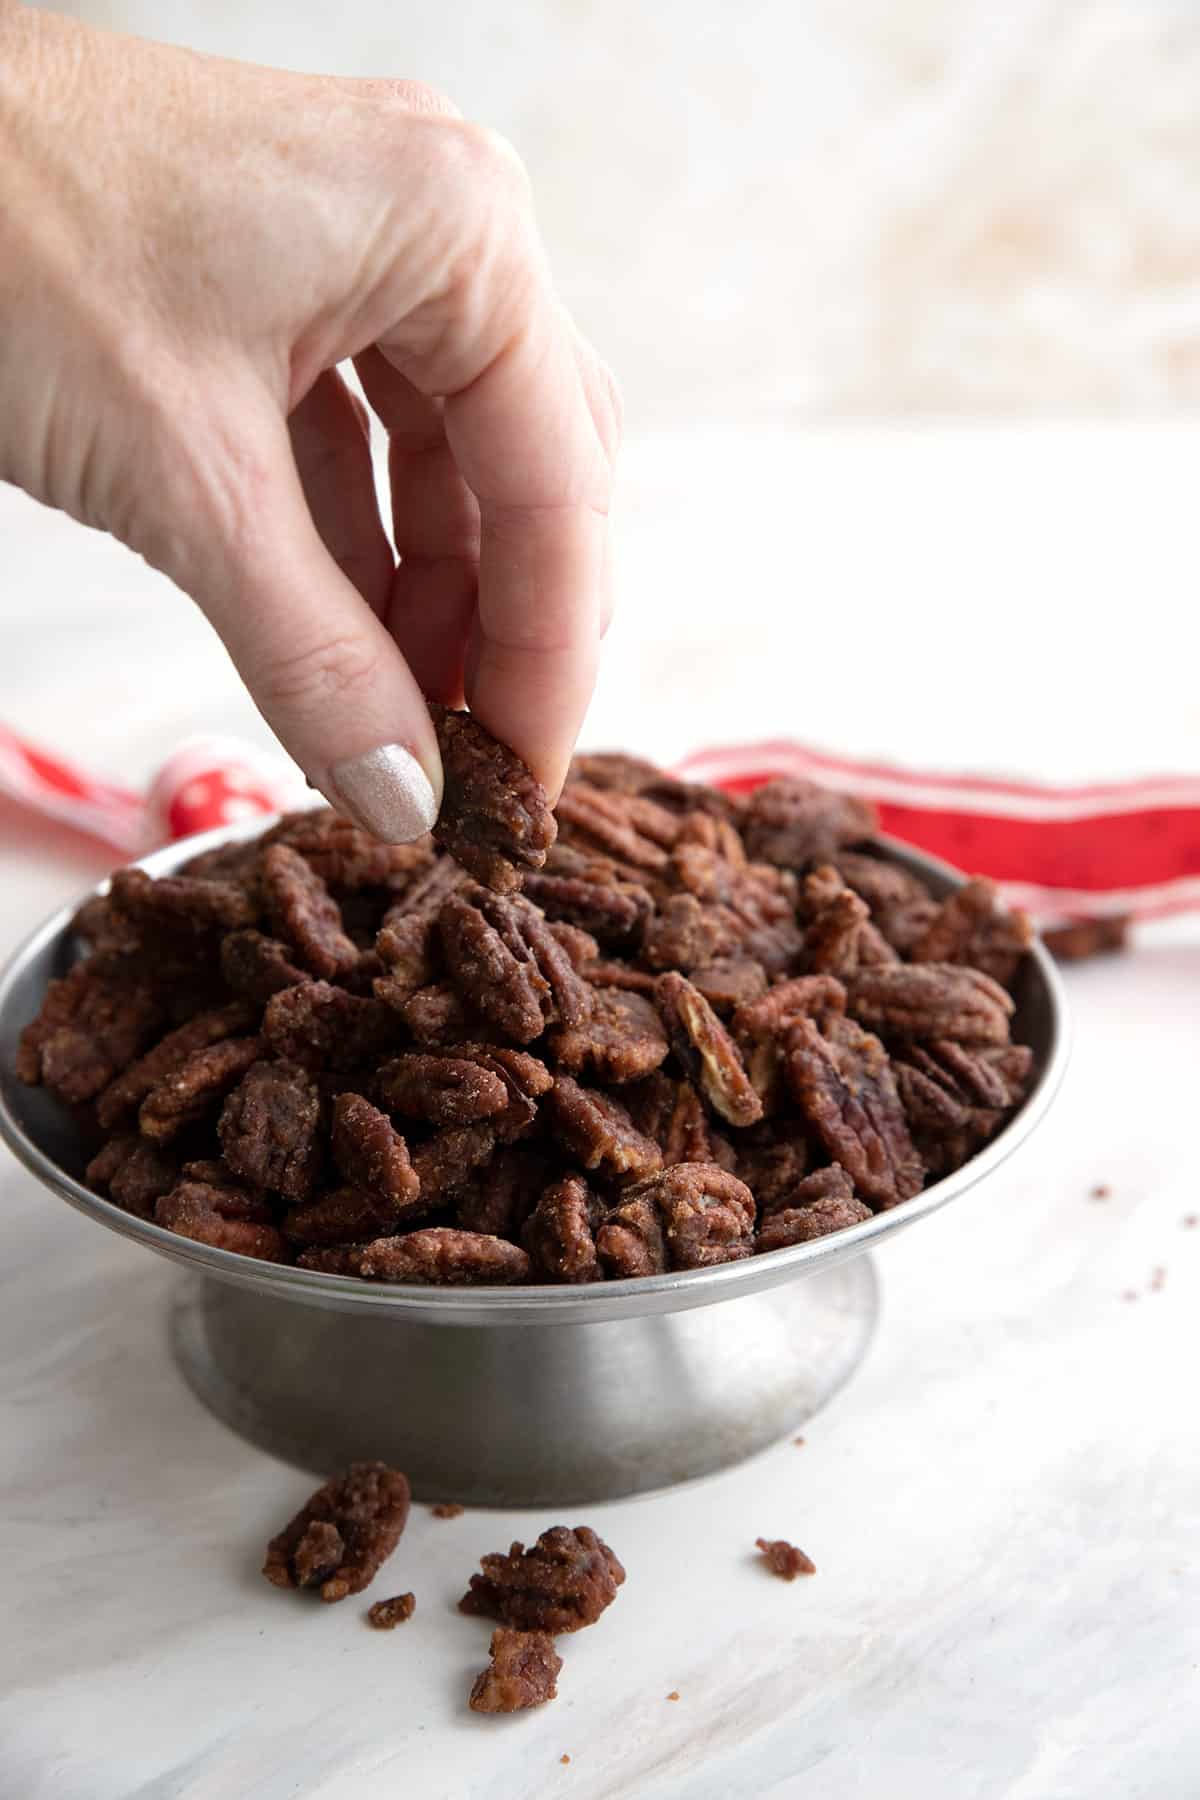 A hand reaching in to take keto candied pecans off a serving plate.